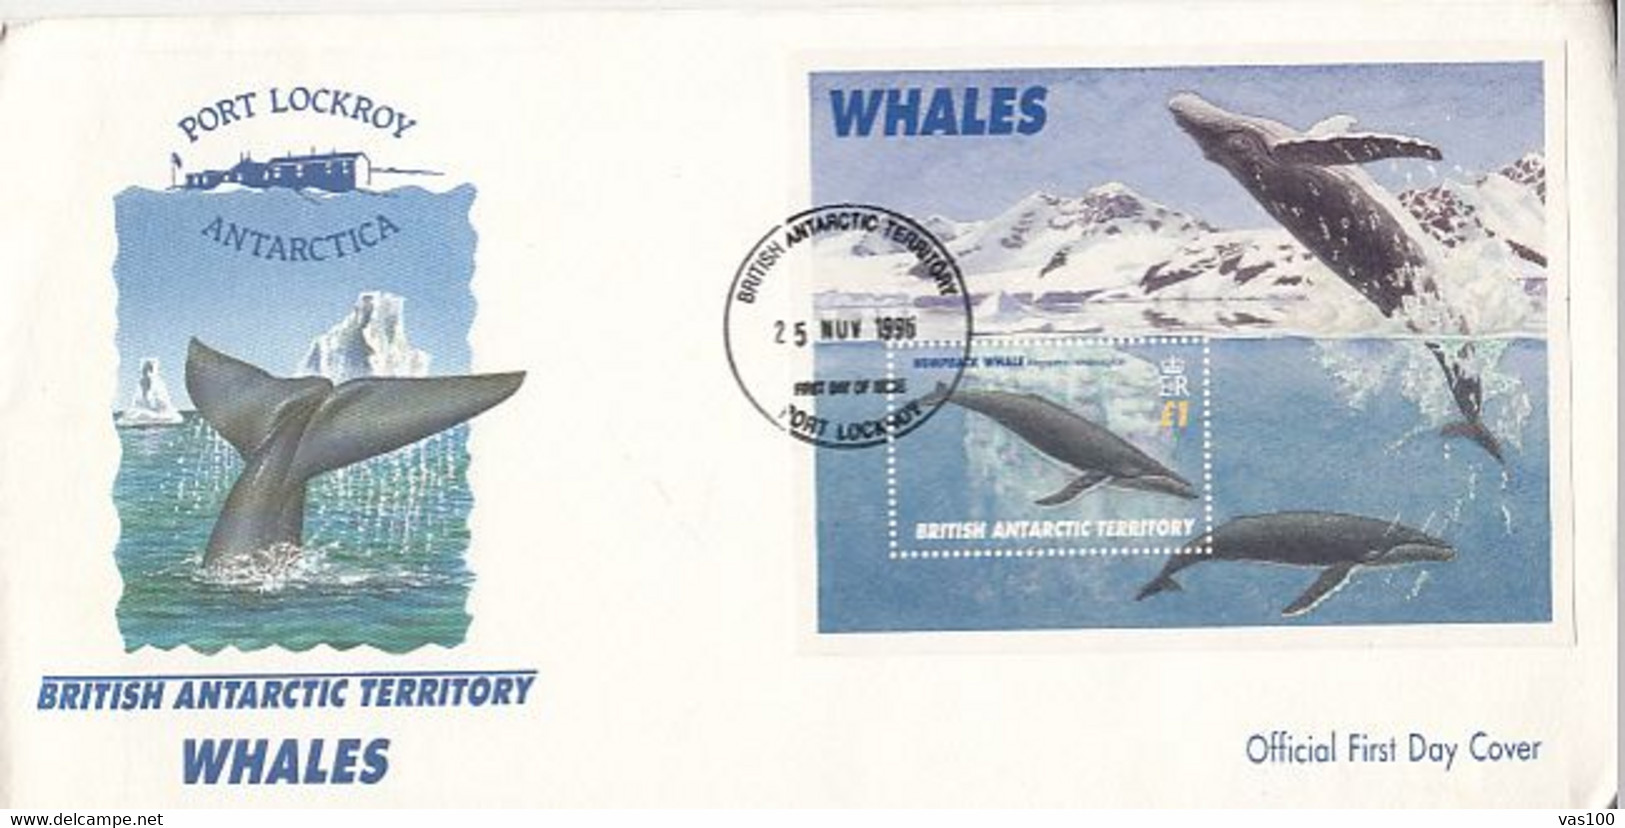 SOUTH POLE, ANTARCTIC WILDLIFE, WHALES, COVER FDC, 1996, UK - Faune Antarctique